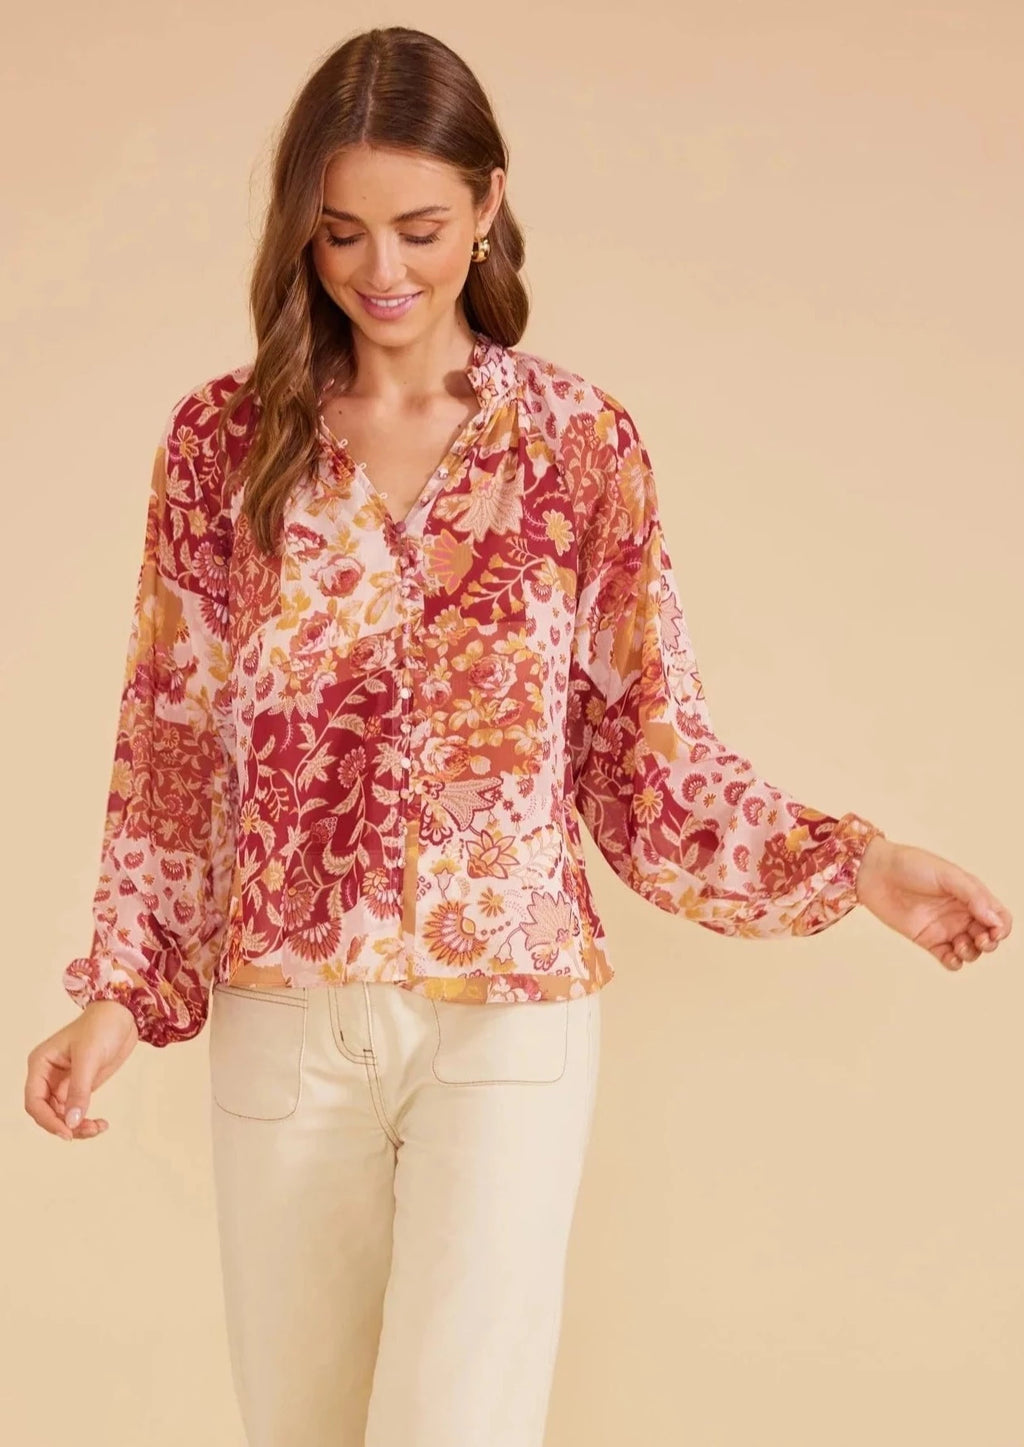 Rylee Blouse by MinkPink - All-over floral and paisley print button-through blouse - Relaxed fit - High neckline with ruched detail - Self-covered buttons with button loops down the centre front - Slightly sheer - Full-length raglan blouson sleeves with elasticised cuffs